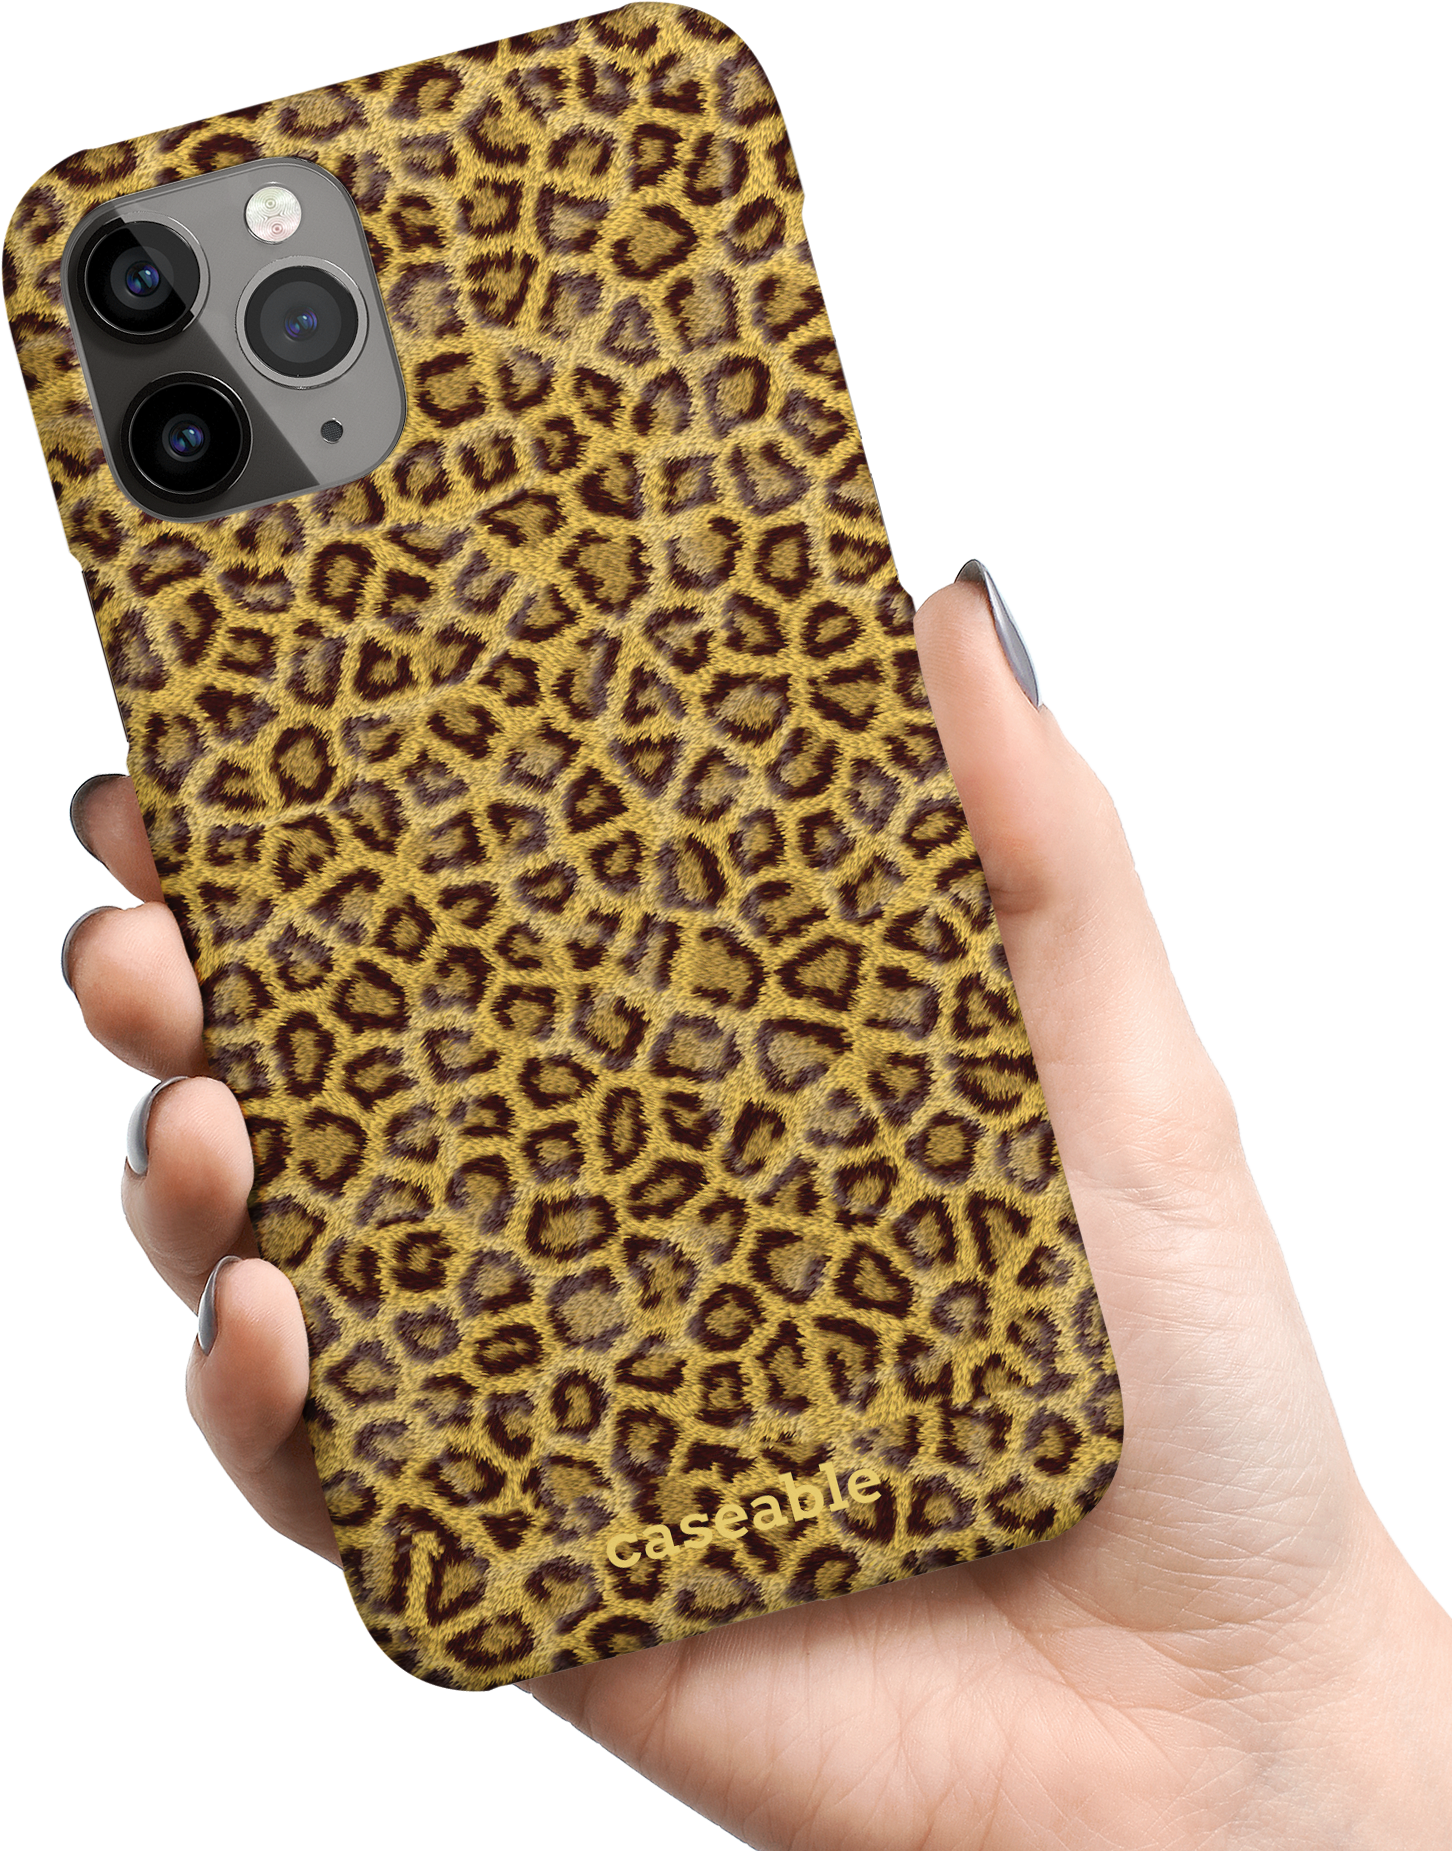 Leopard Skin Hard Shell Phone Case Apple iPhone 11 Pro held in hand